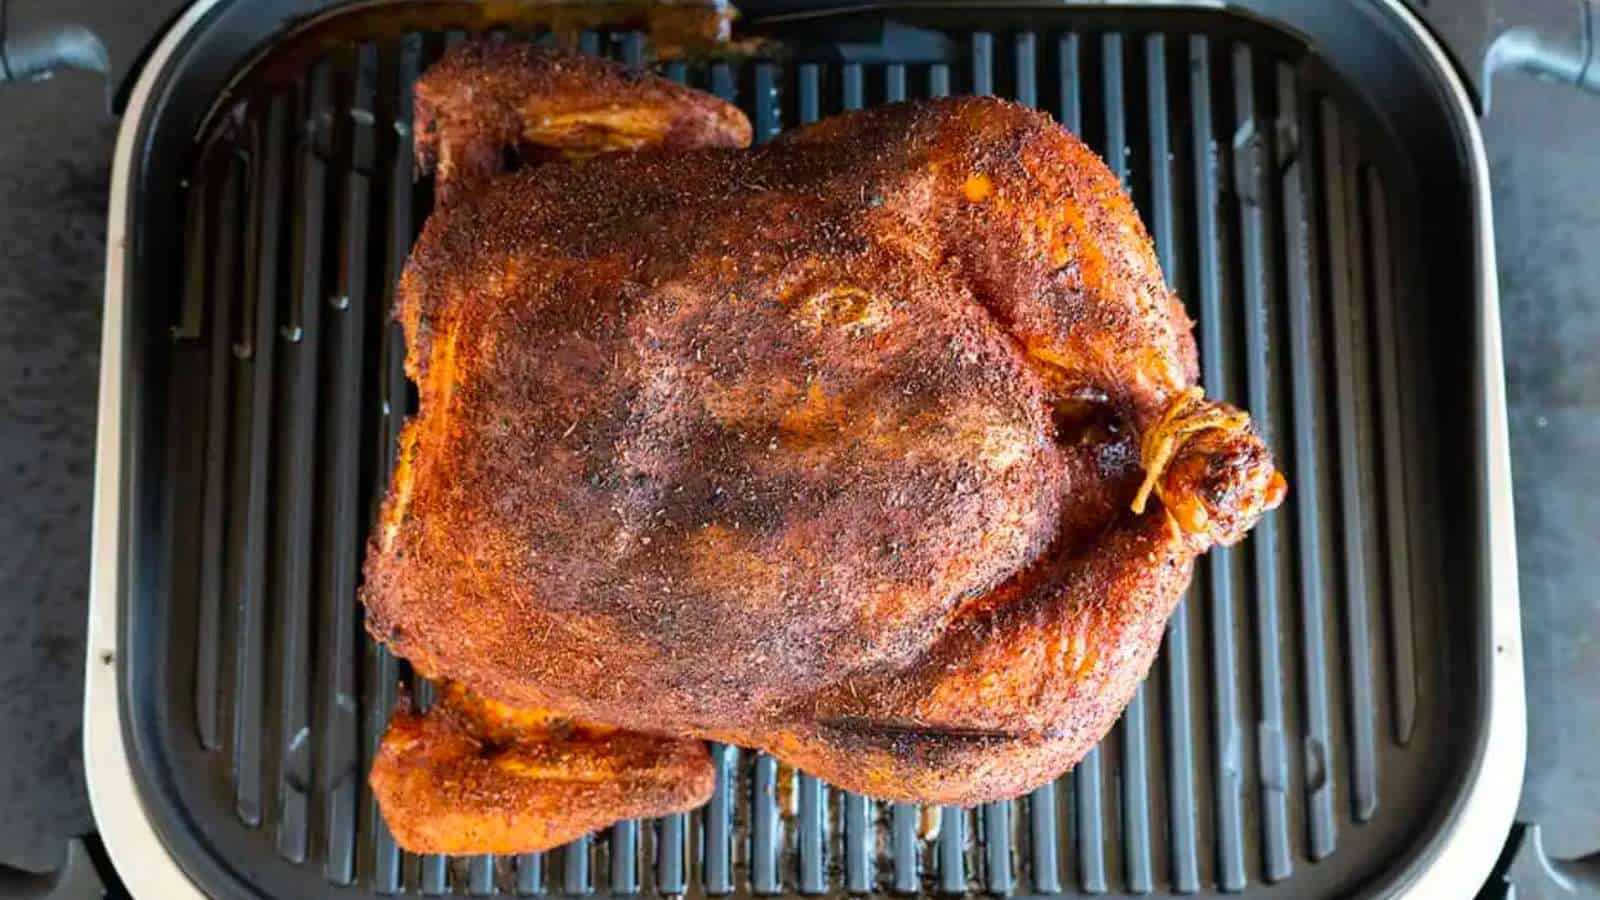 Smoked whole chicken on Grilled.